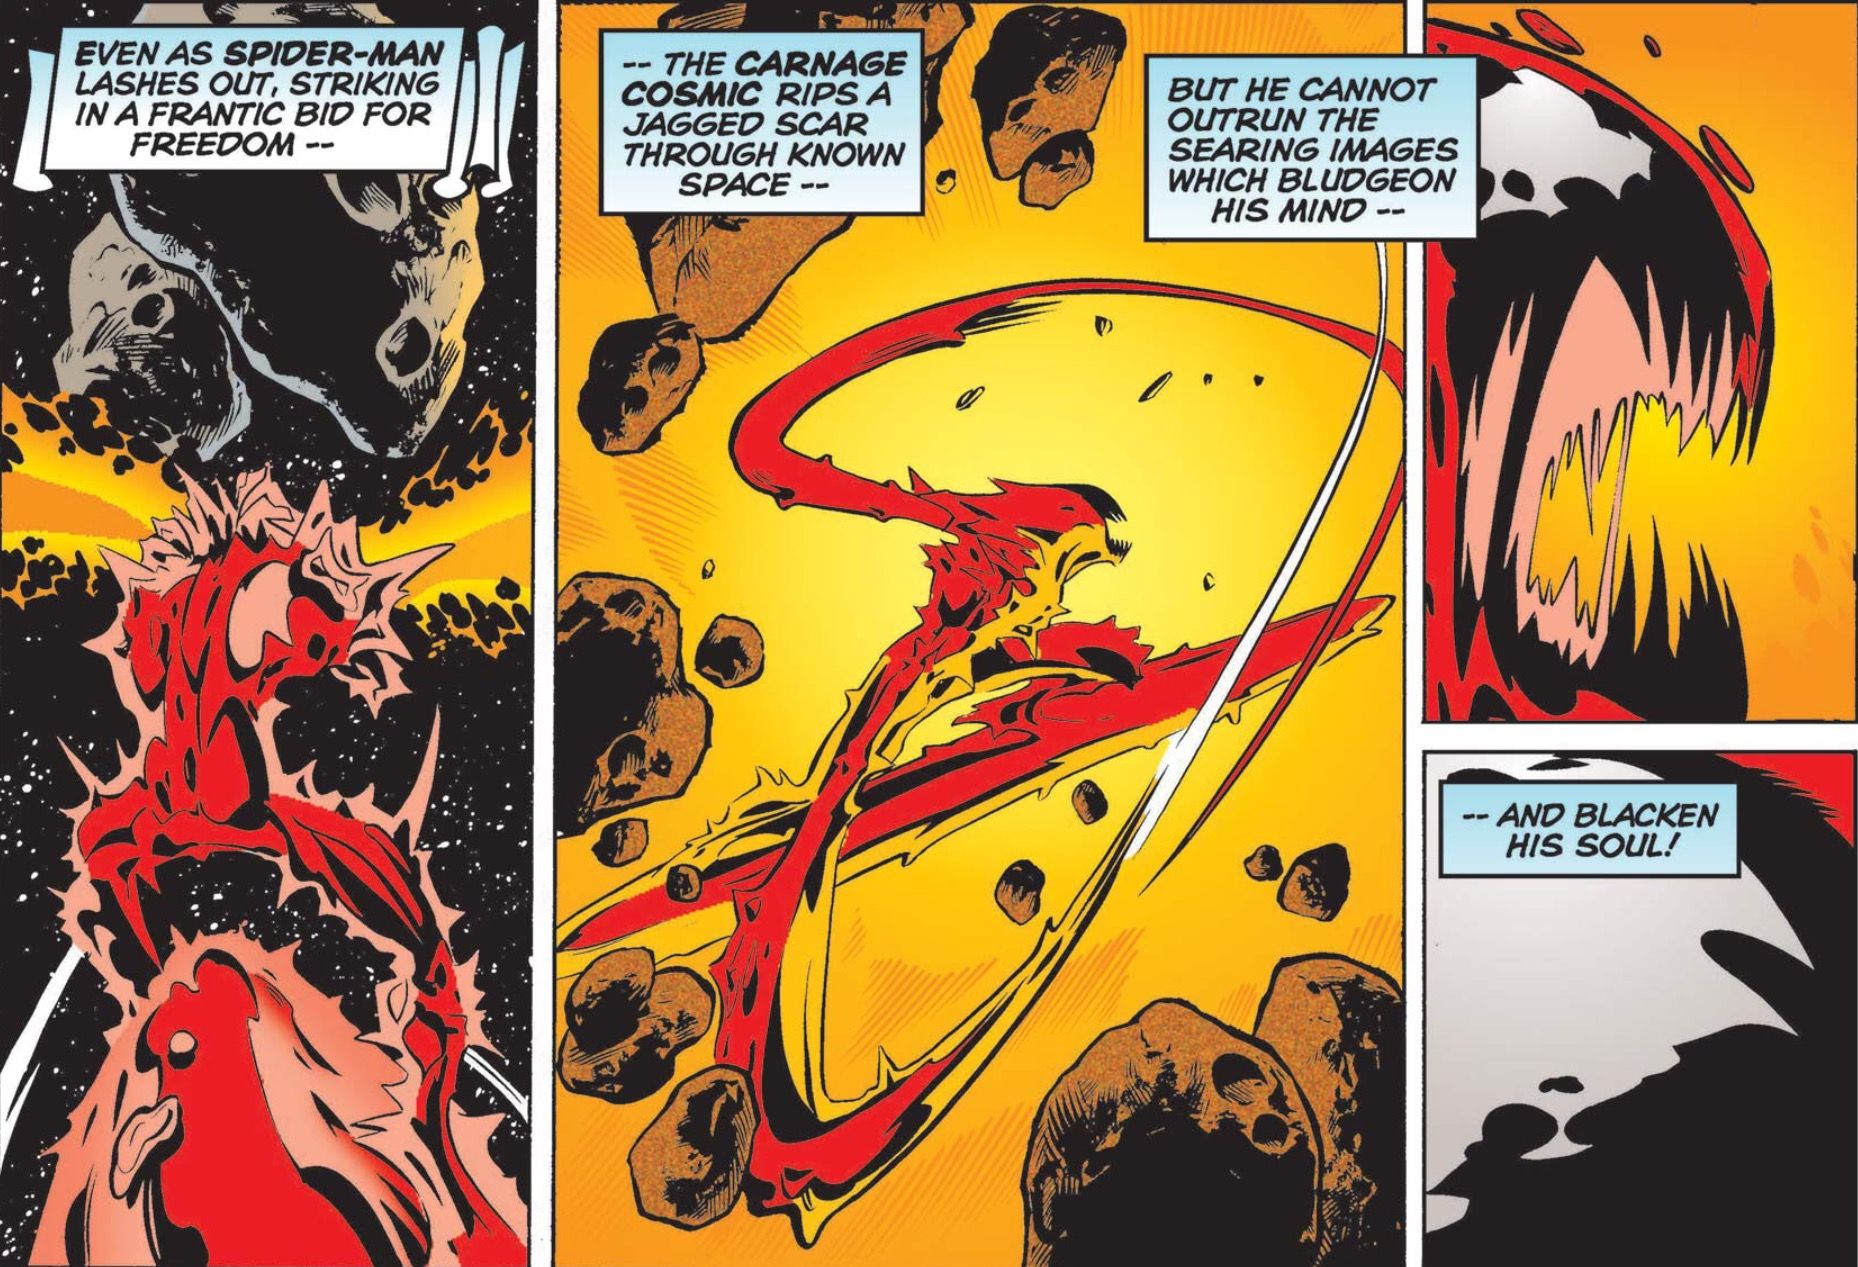 Silver Surfer as the Carnage Cosmic in Amazing Spider-Man 431